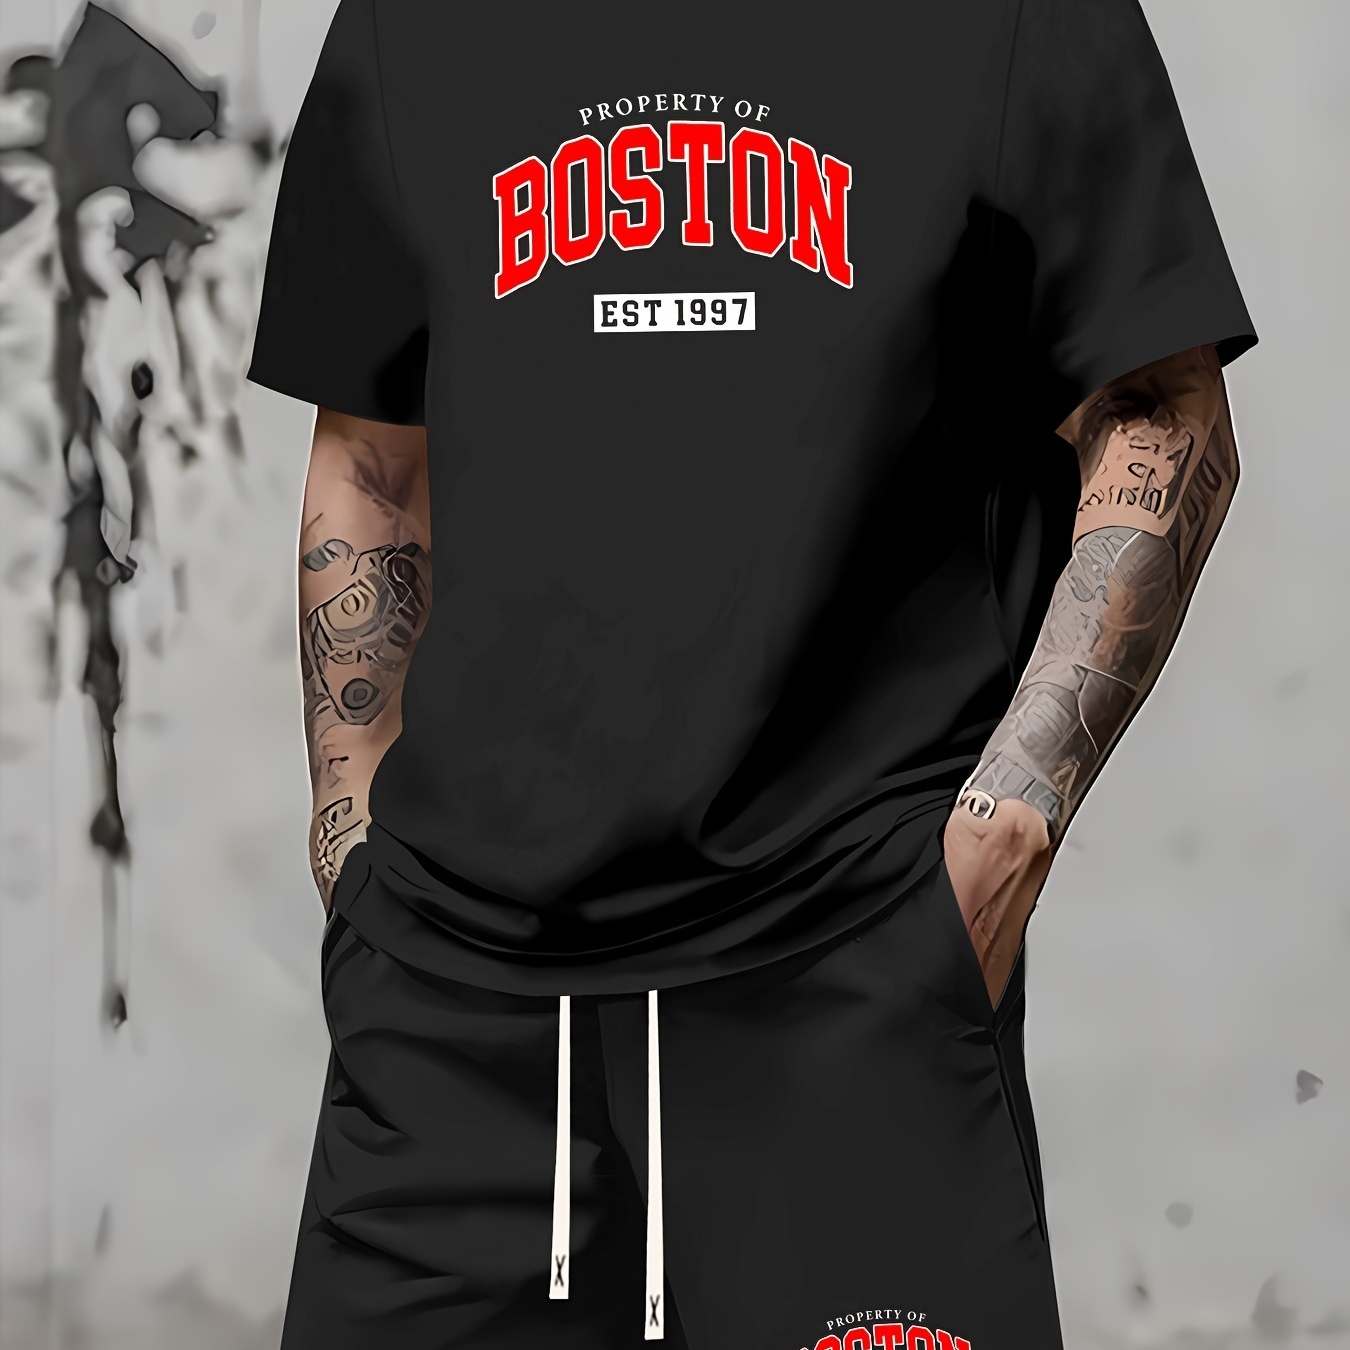 

Boston Letter Print, Comfortable And Trendy Short Sleeve T-shirt & Simple Shorts Set For Men, Breathable And Comfy Summer Clothes, Suitable For Casual Time